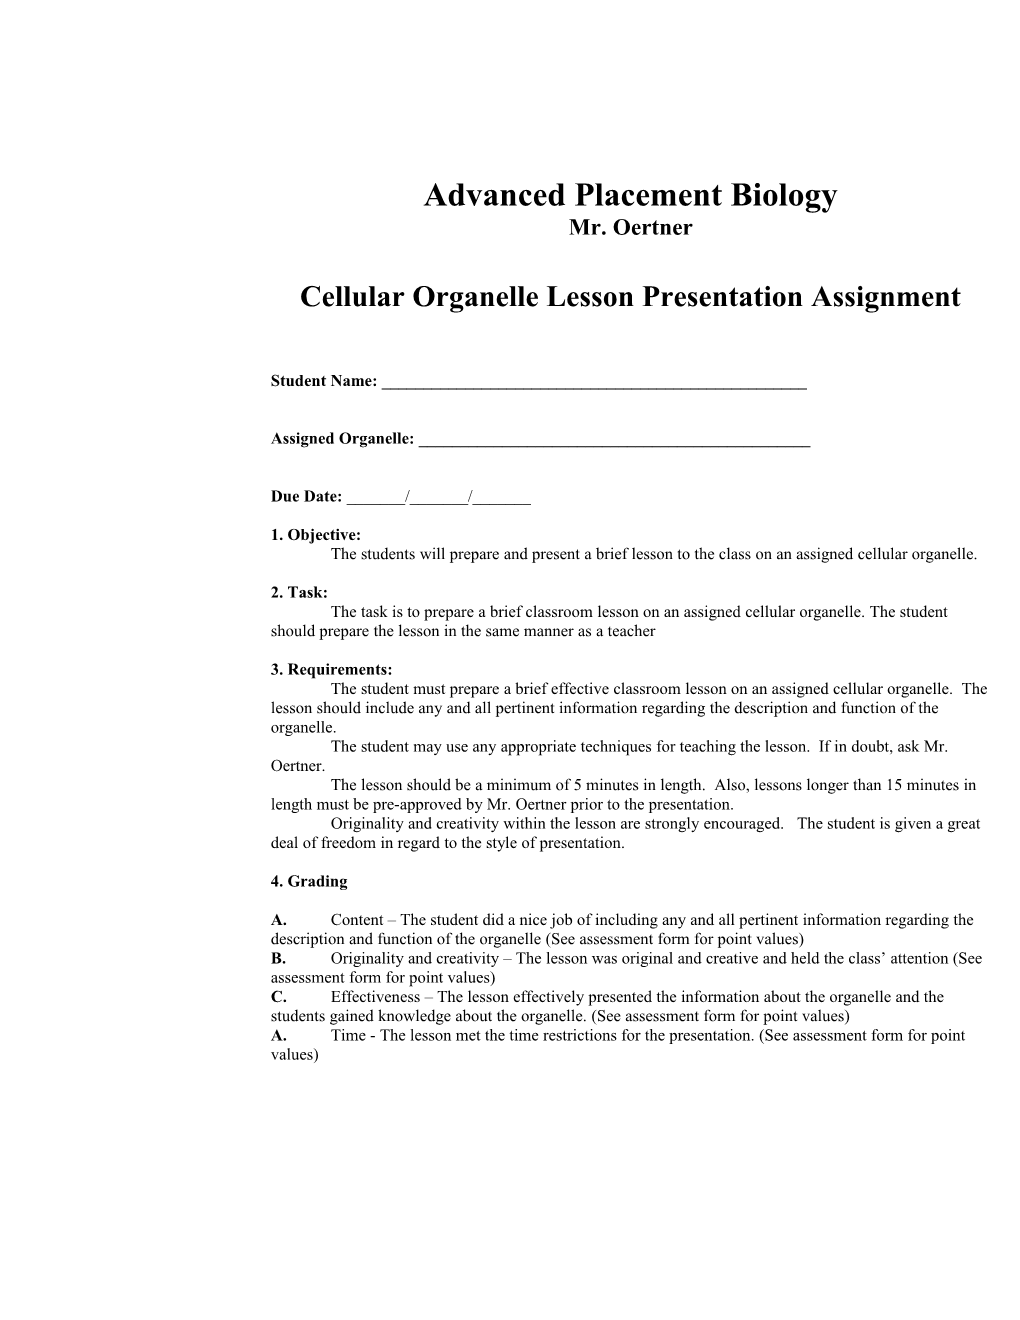 Cellular Organelle Lesson Presentation Assignment